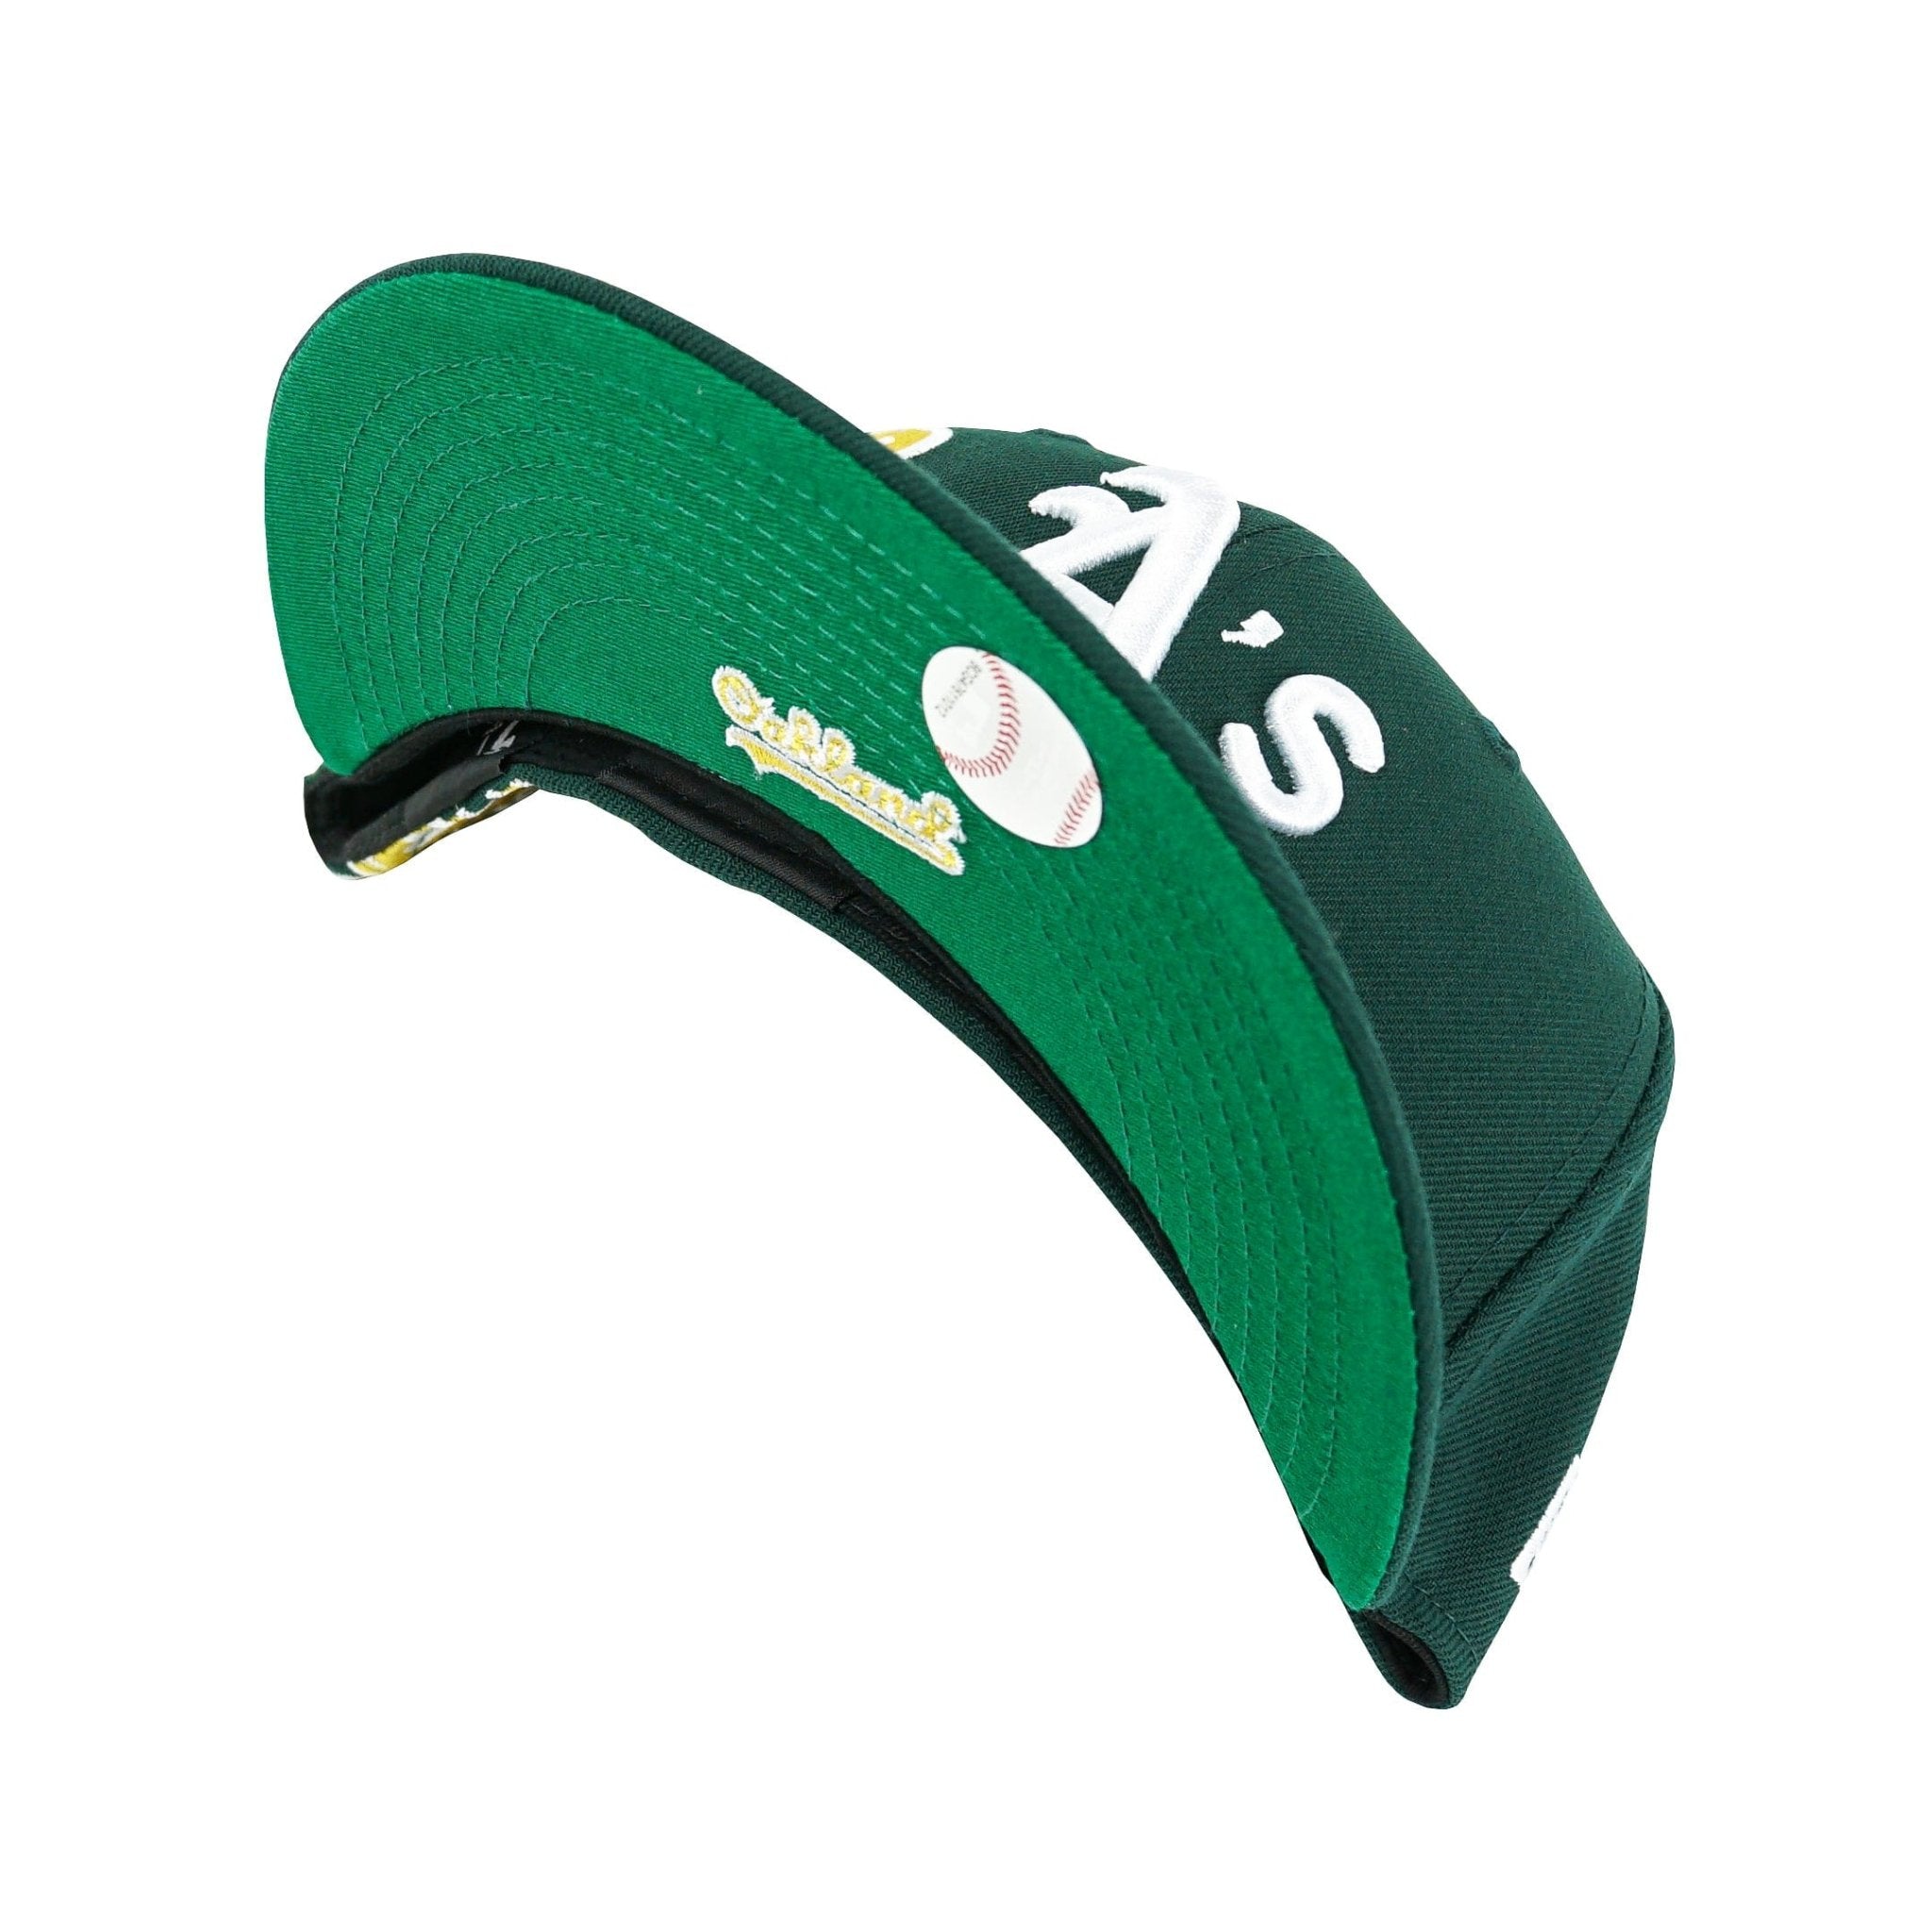 Oakland Athletics Sidesplit 59Fifty Fitted Hat in green - New Era - State Of Flux